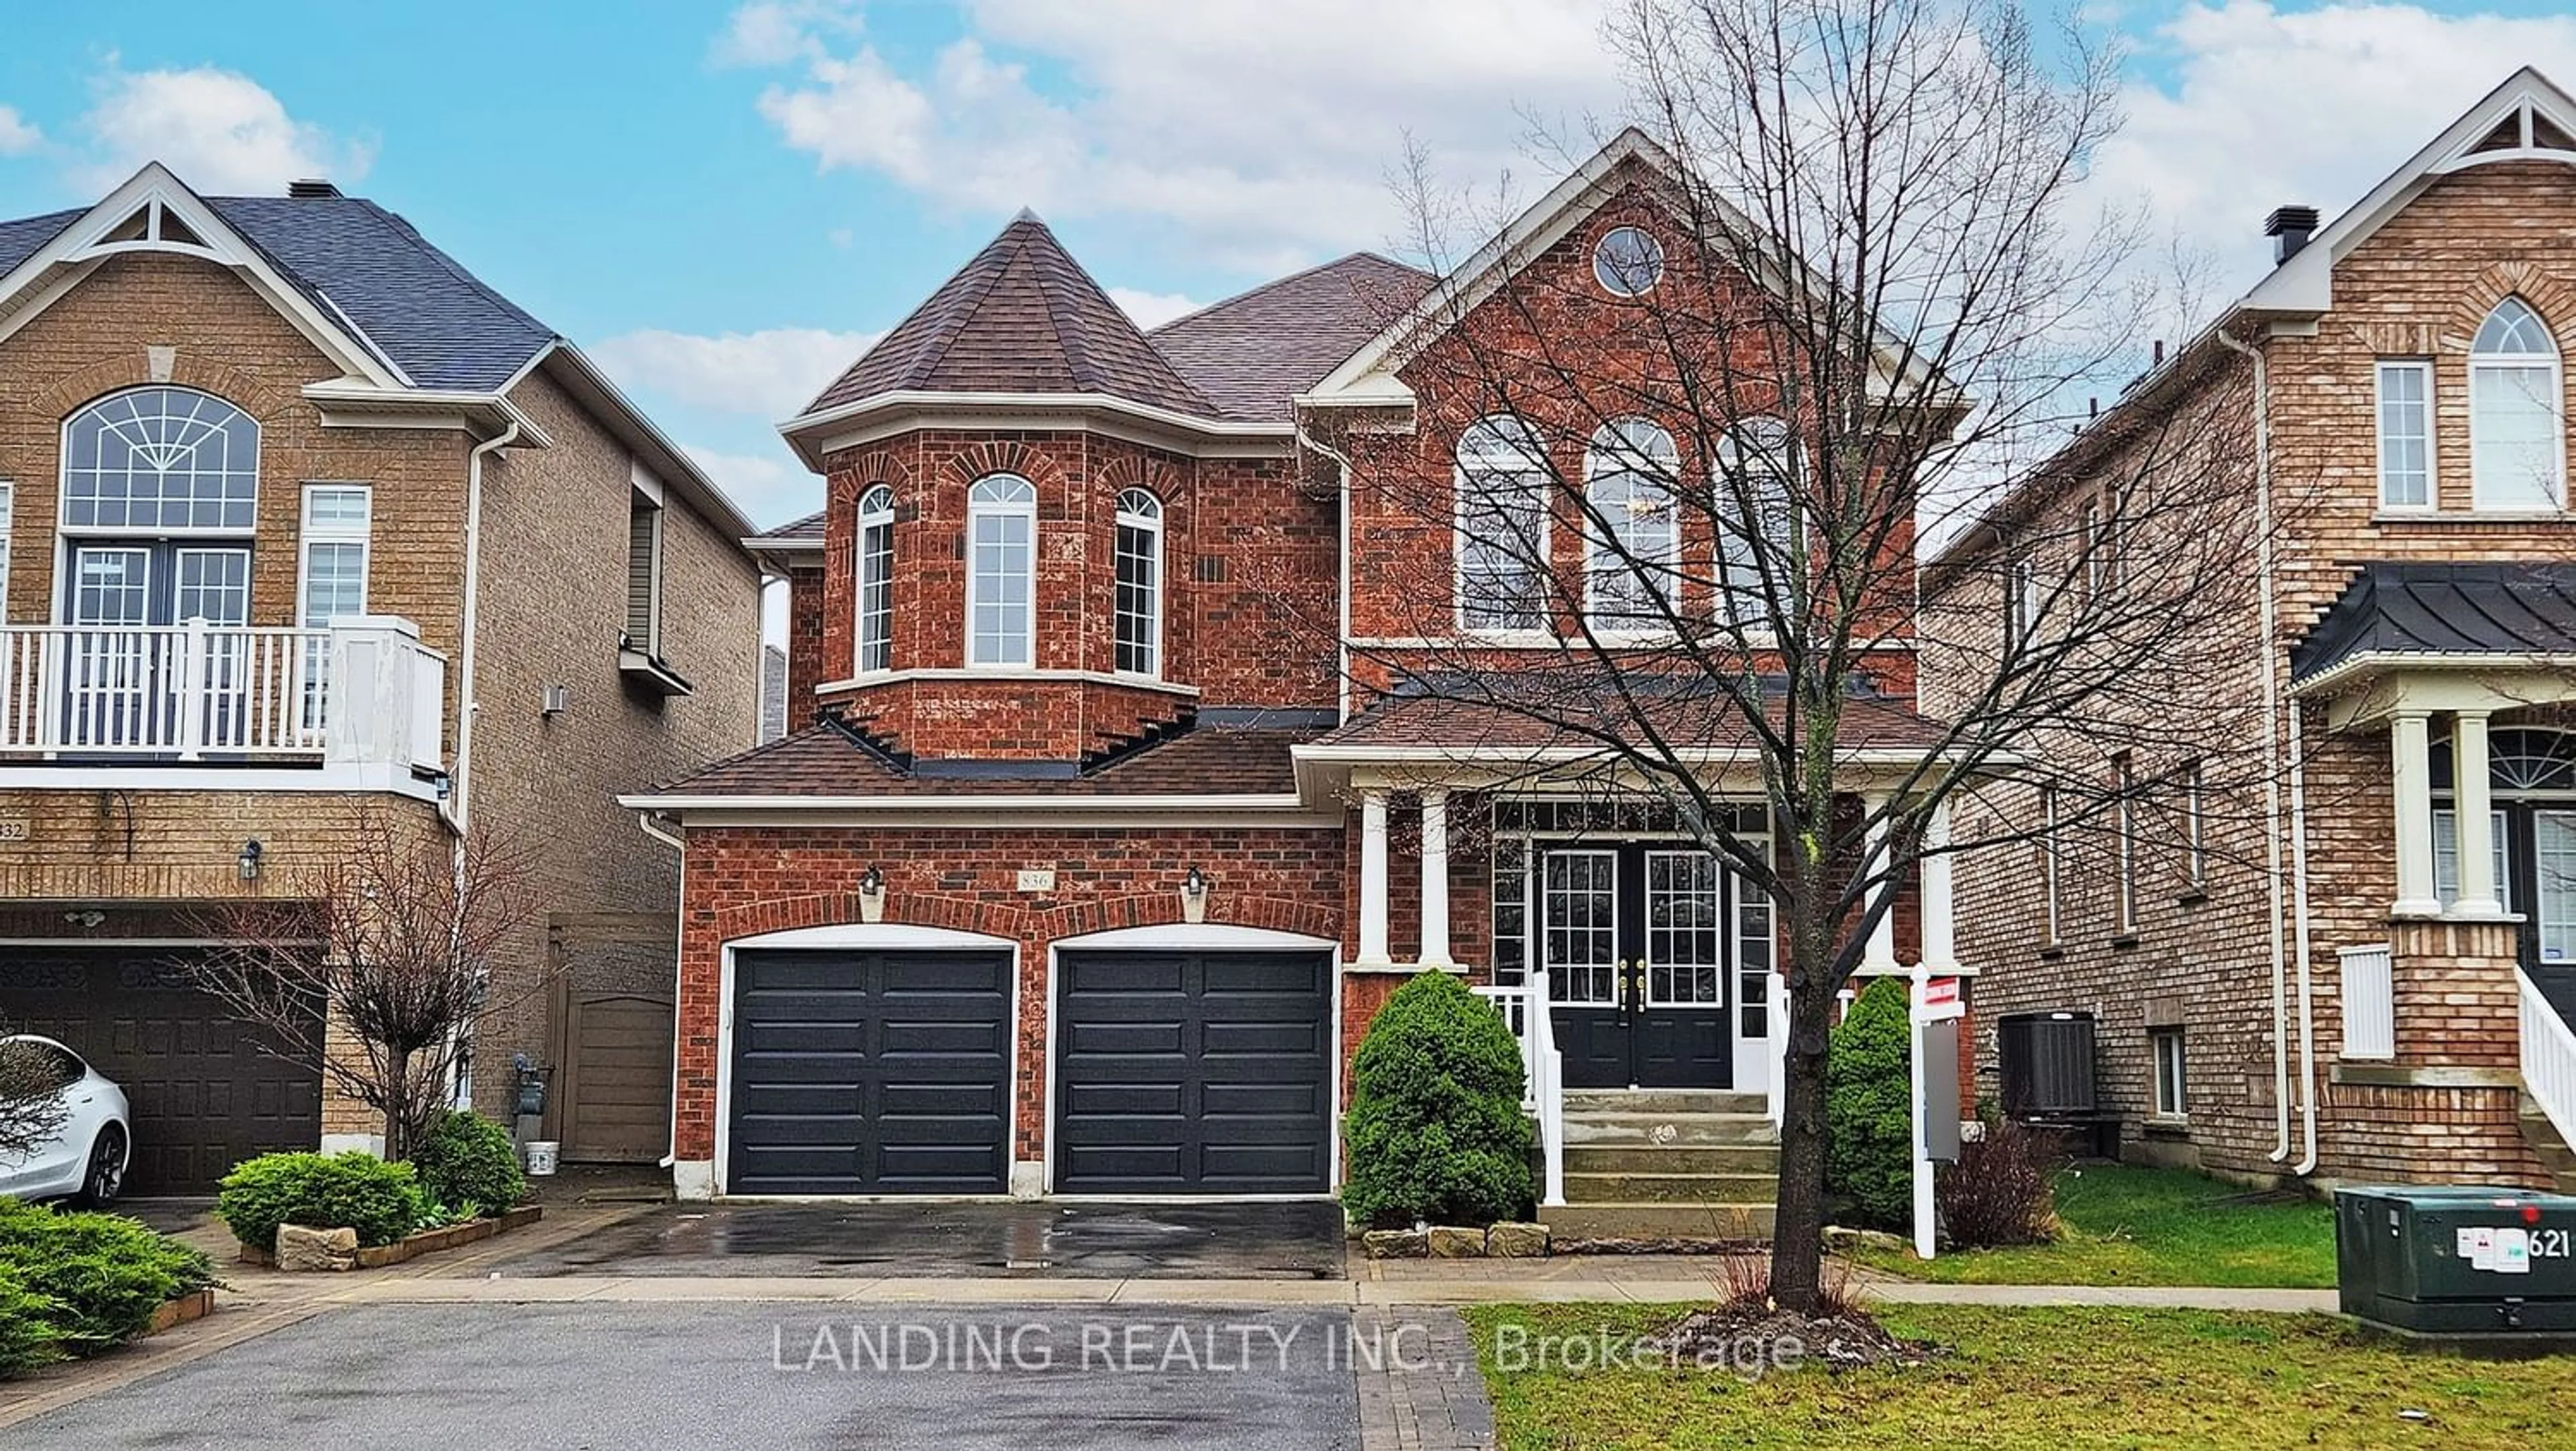 Home with brick exterior material for 836 Millard St, Whitchurch-Stouffville Ontario L4A 4B6